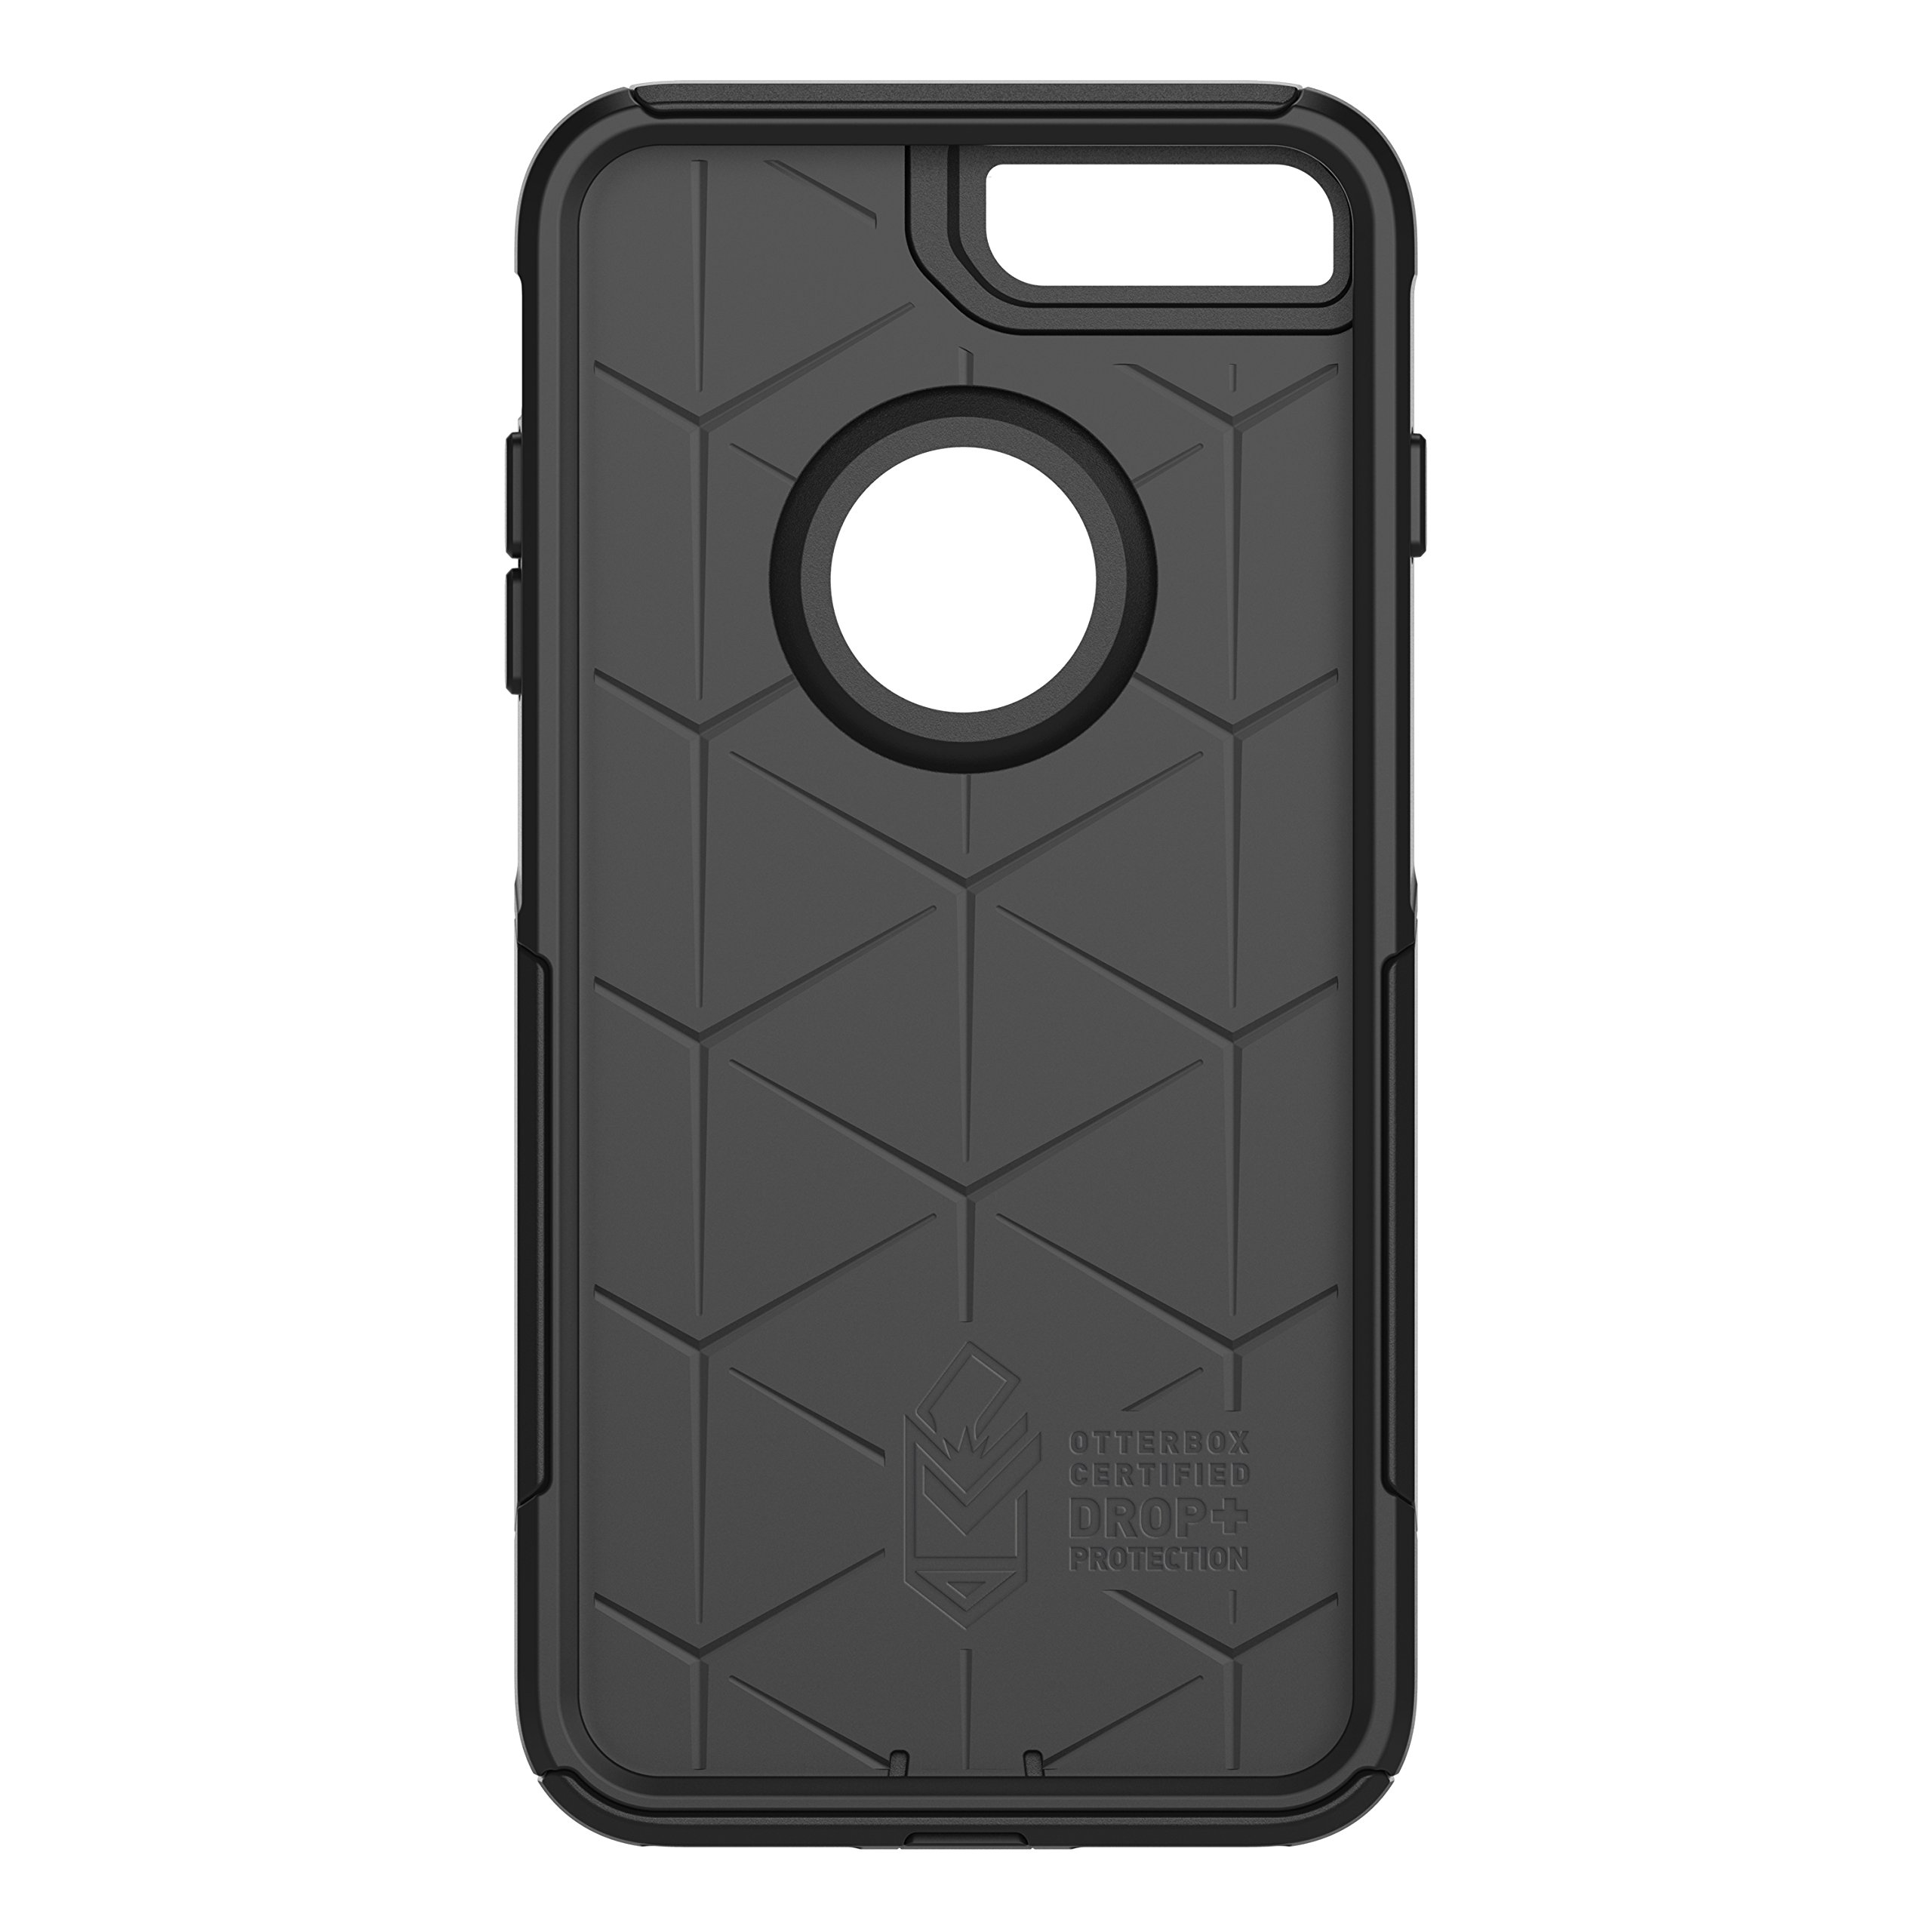 OtterBox iPhone 8 PLUS & iPhone 7 PLUS (ONLY) Commuter Series Case - BLACK, slim & tough, pocket-friendly, with port protection